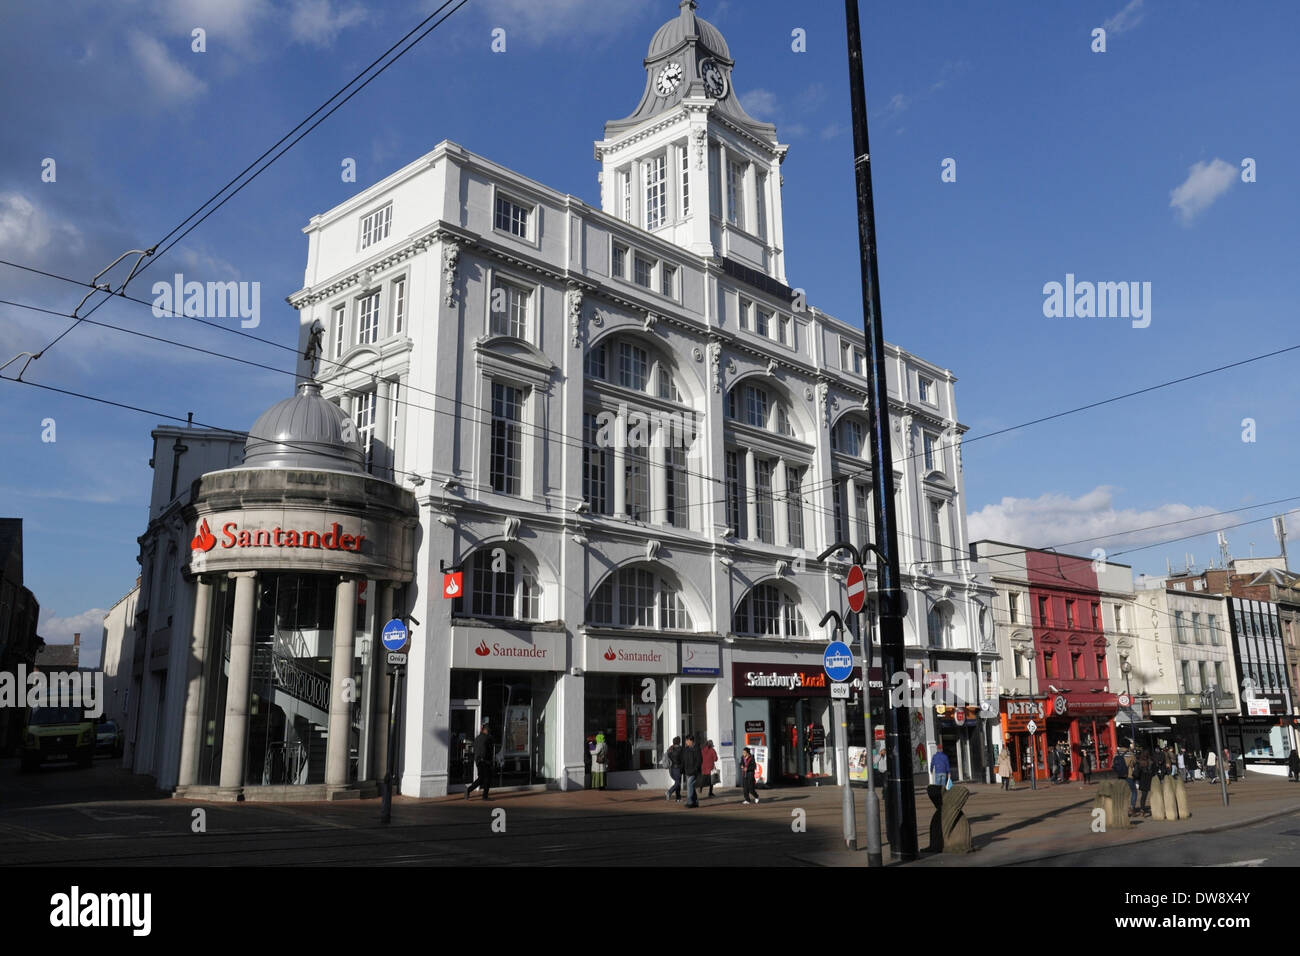 Santander bank and shops on High St in Sheffield city centre England. Star and telegraph building. Iconic white grade II listed building, English city Stock Photo